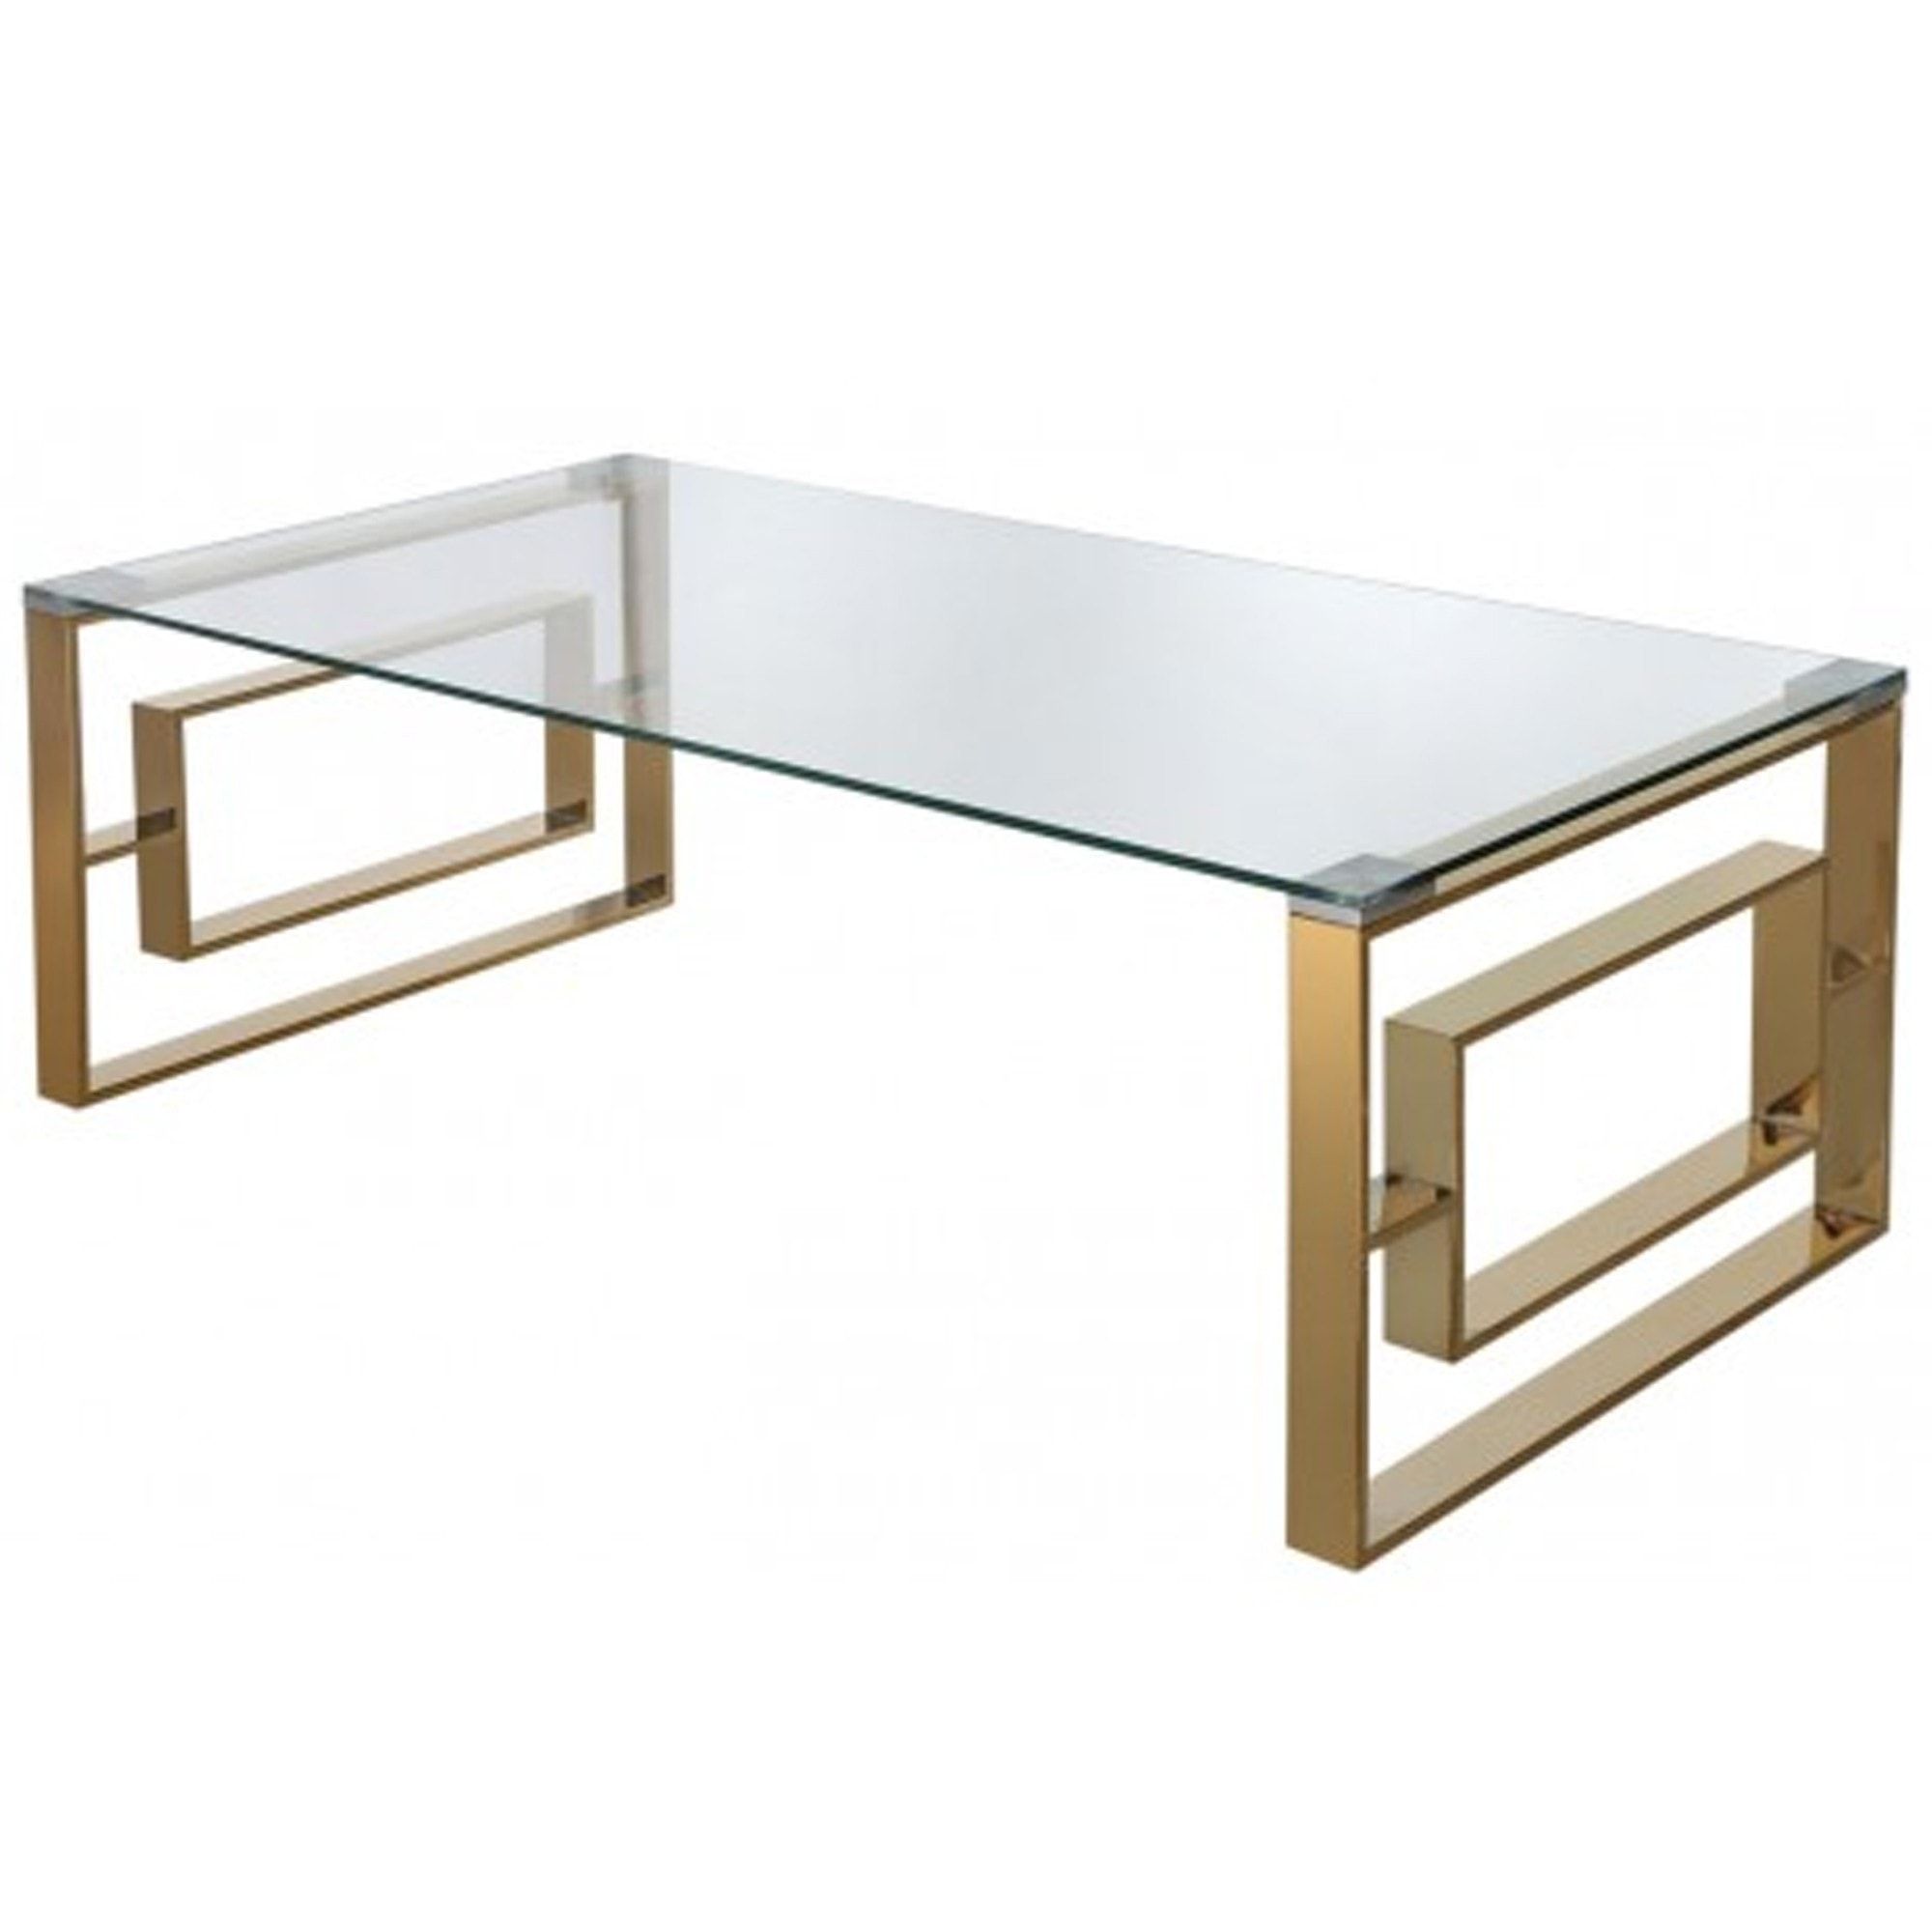 Apex Gold Metal Coffee Table | Gold Metal | Metal Coffee Table Pertaining To Glossy Finished Metal Coffee Tables (View 6 of 20)